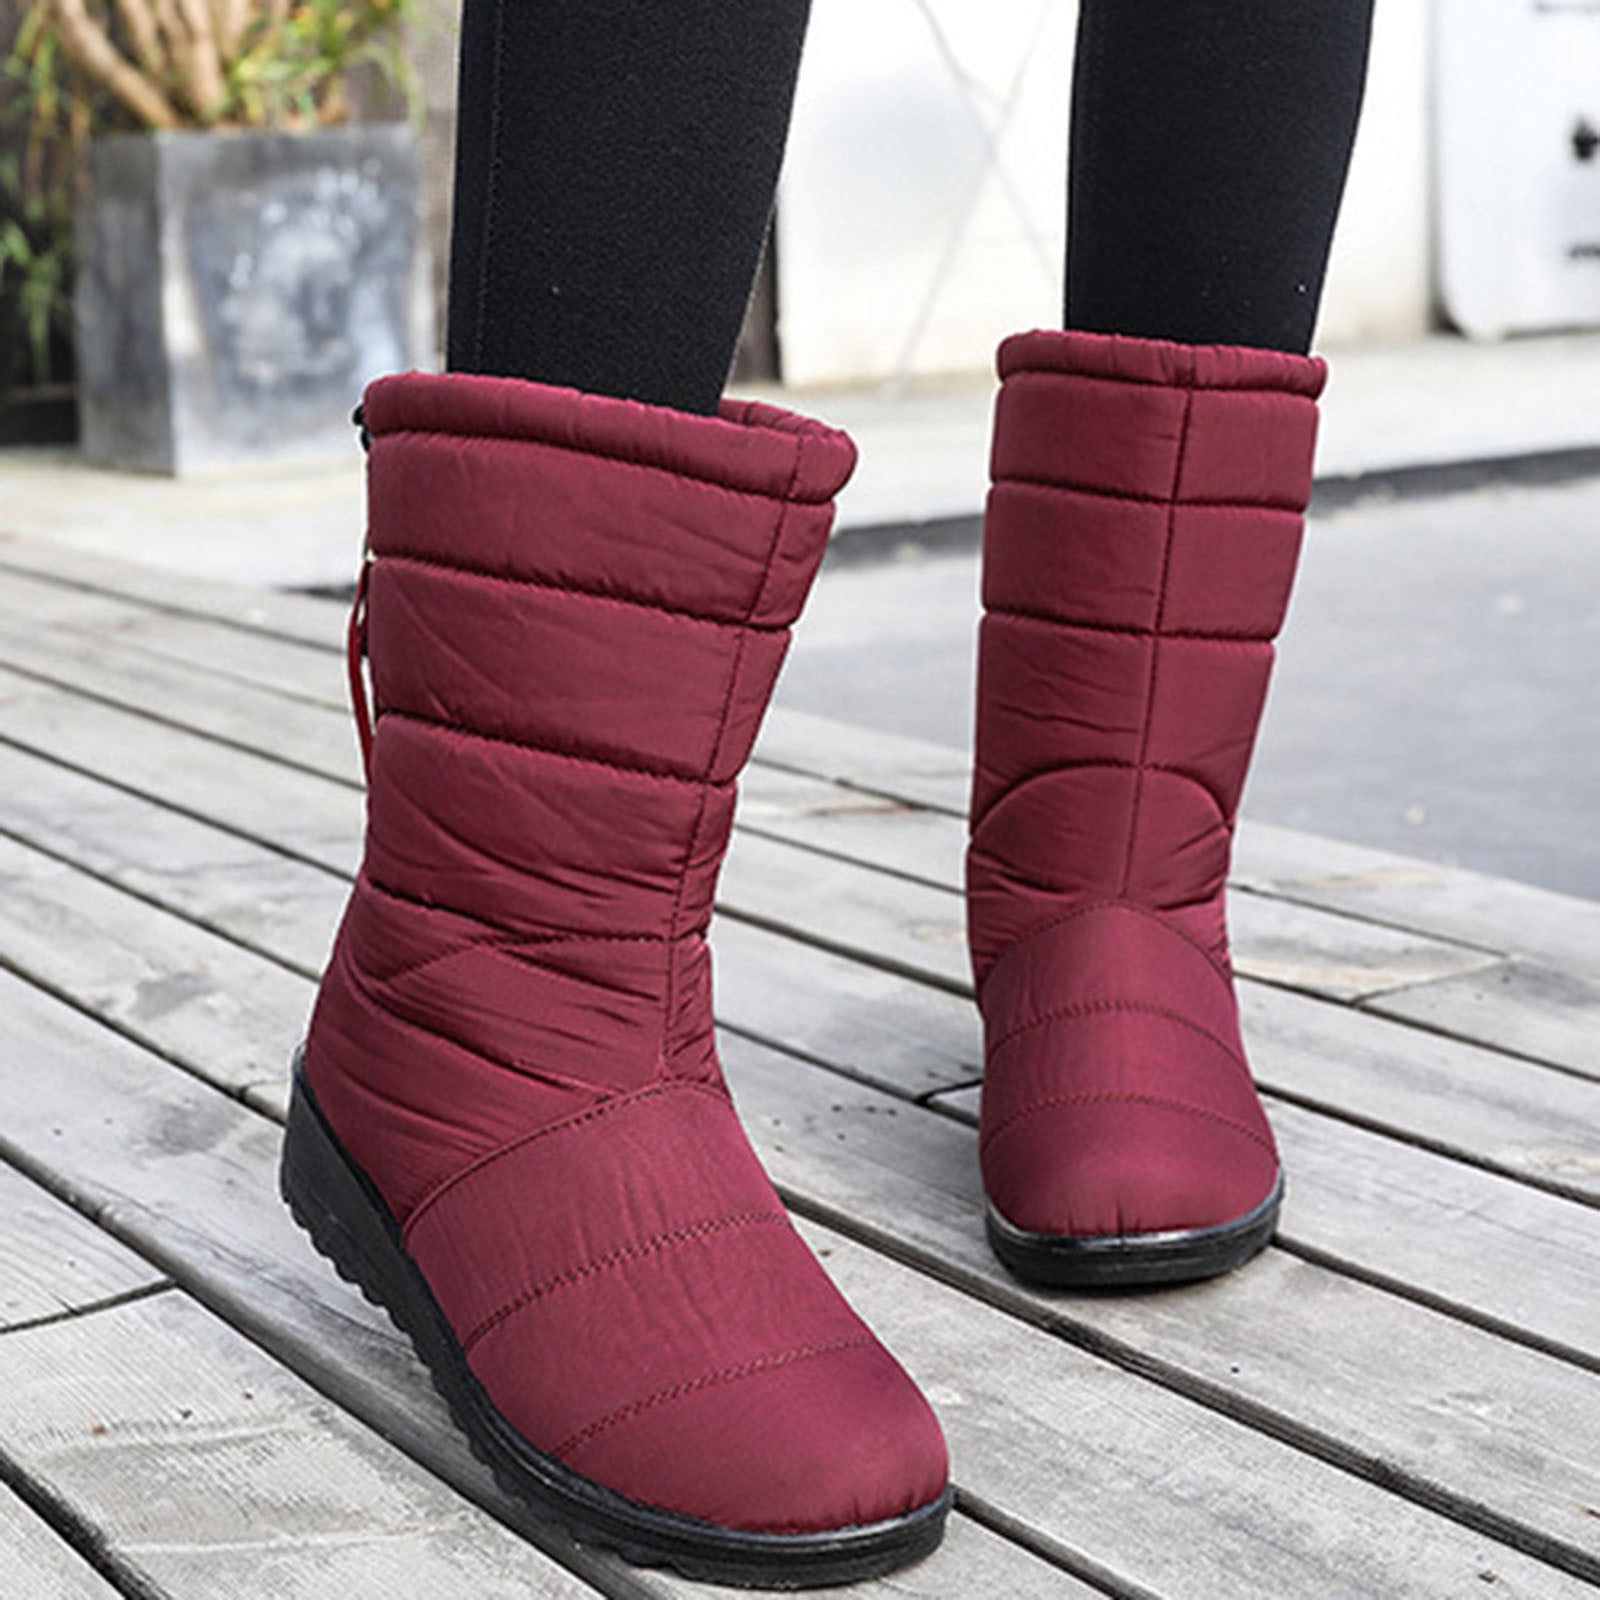 By name Bakery stewardess Snow Boots Clearance Ladies Winter High Tube Fringed Warm Waterproof Cloth Snow  Boots Lazy Shoes - Walmart.com